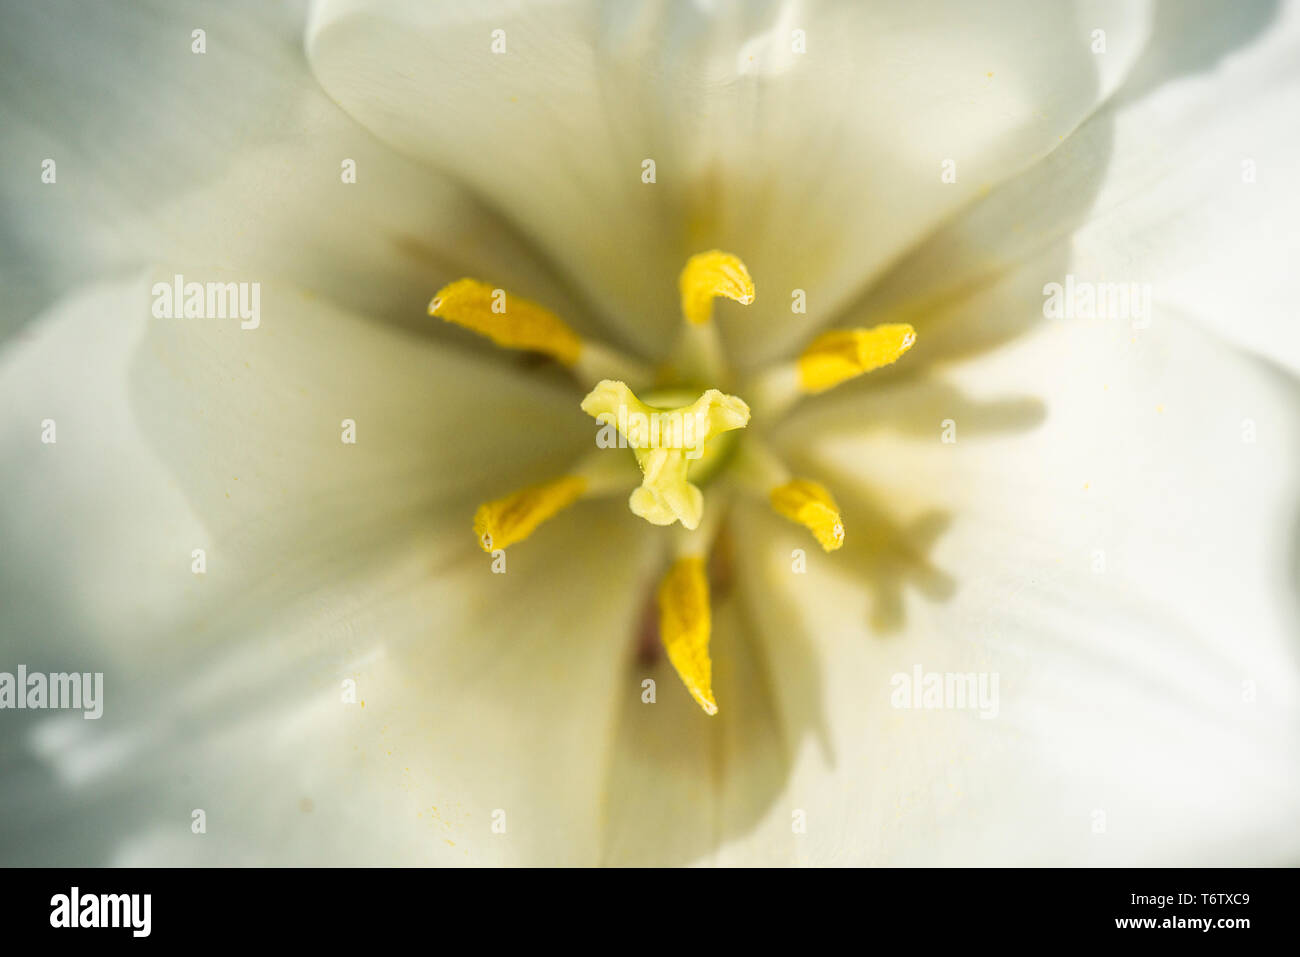 A close up of the pistil and stamen of a Stock Photo